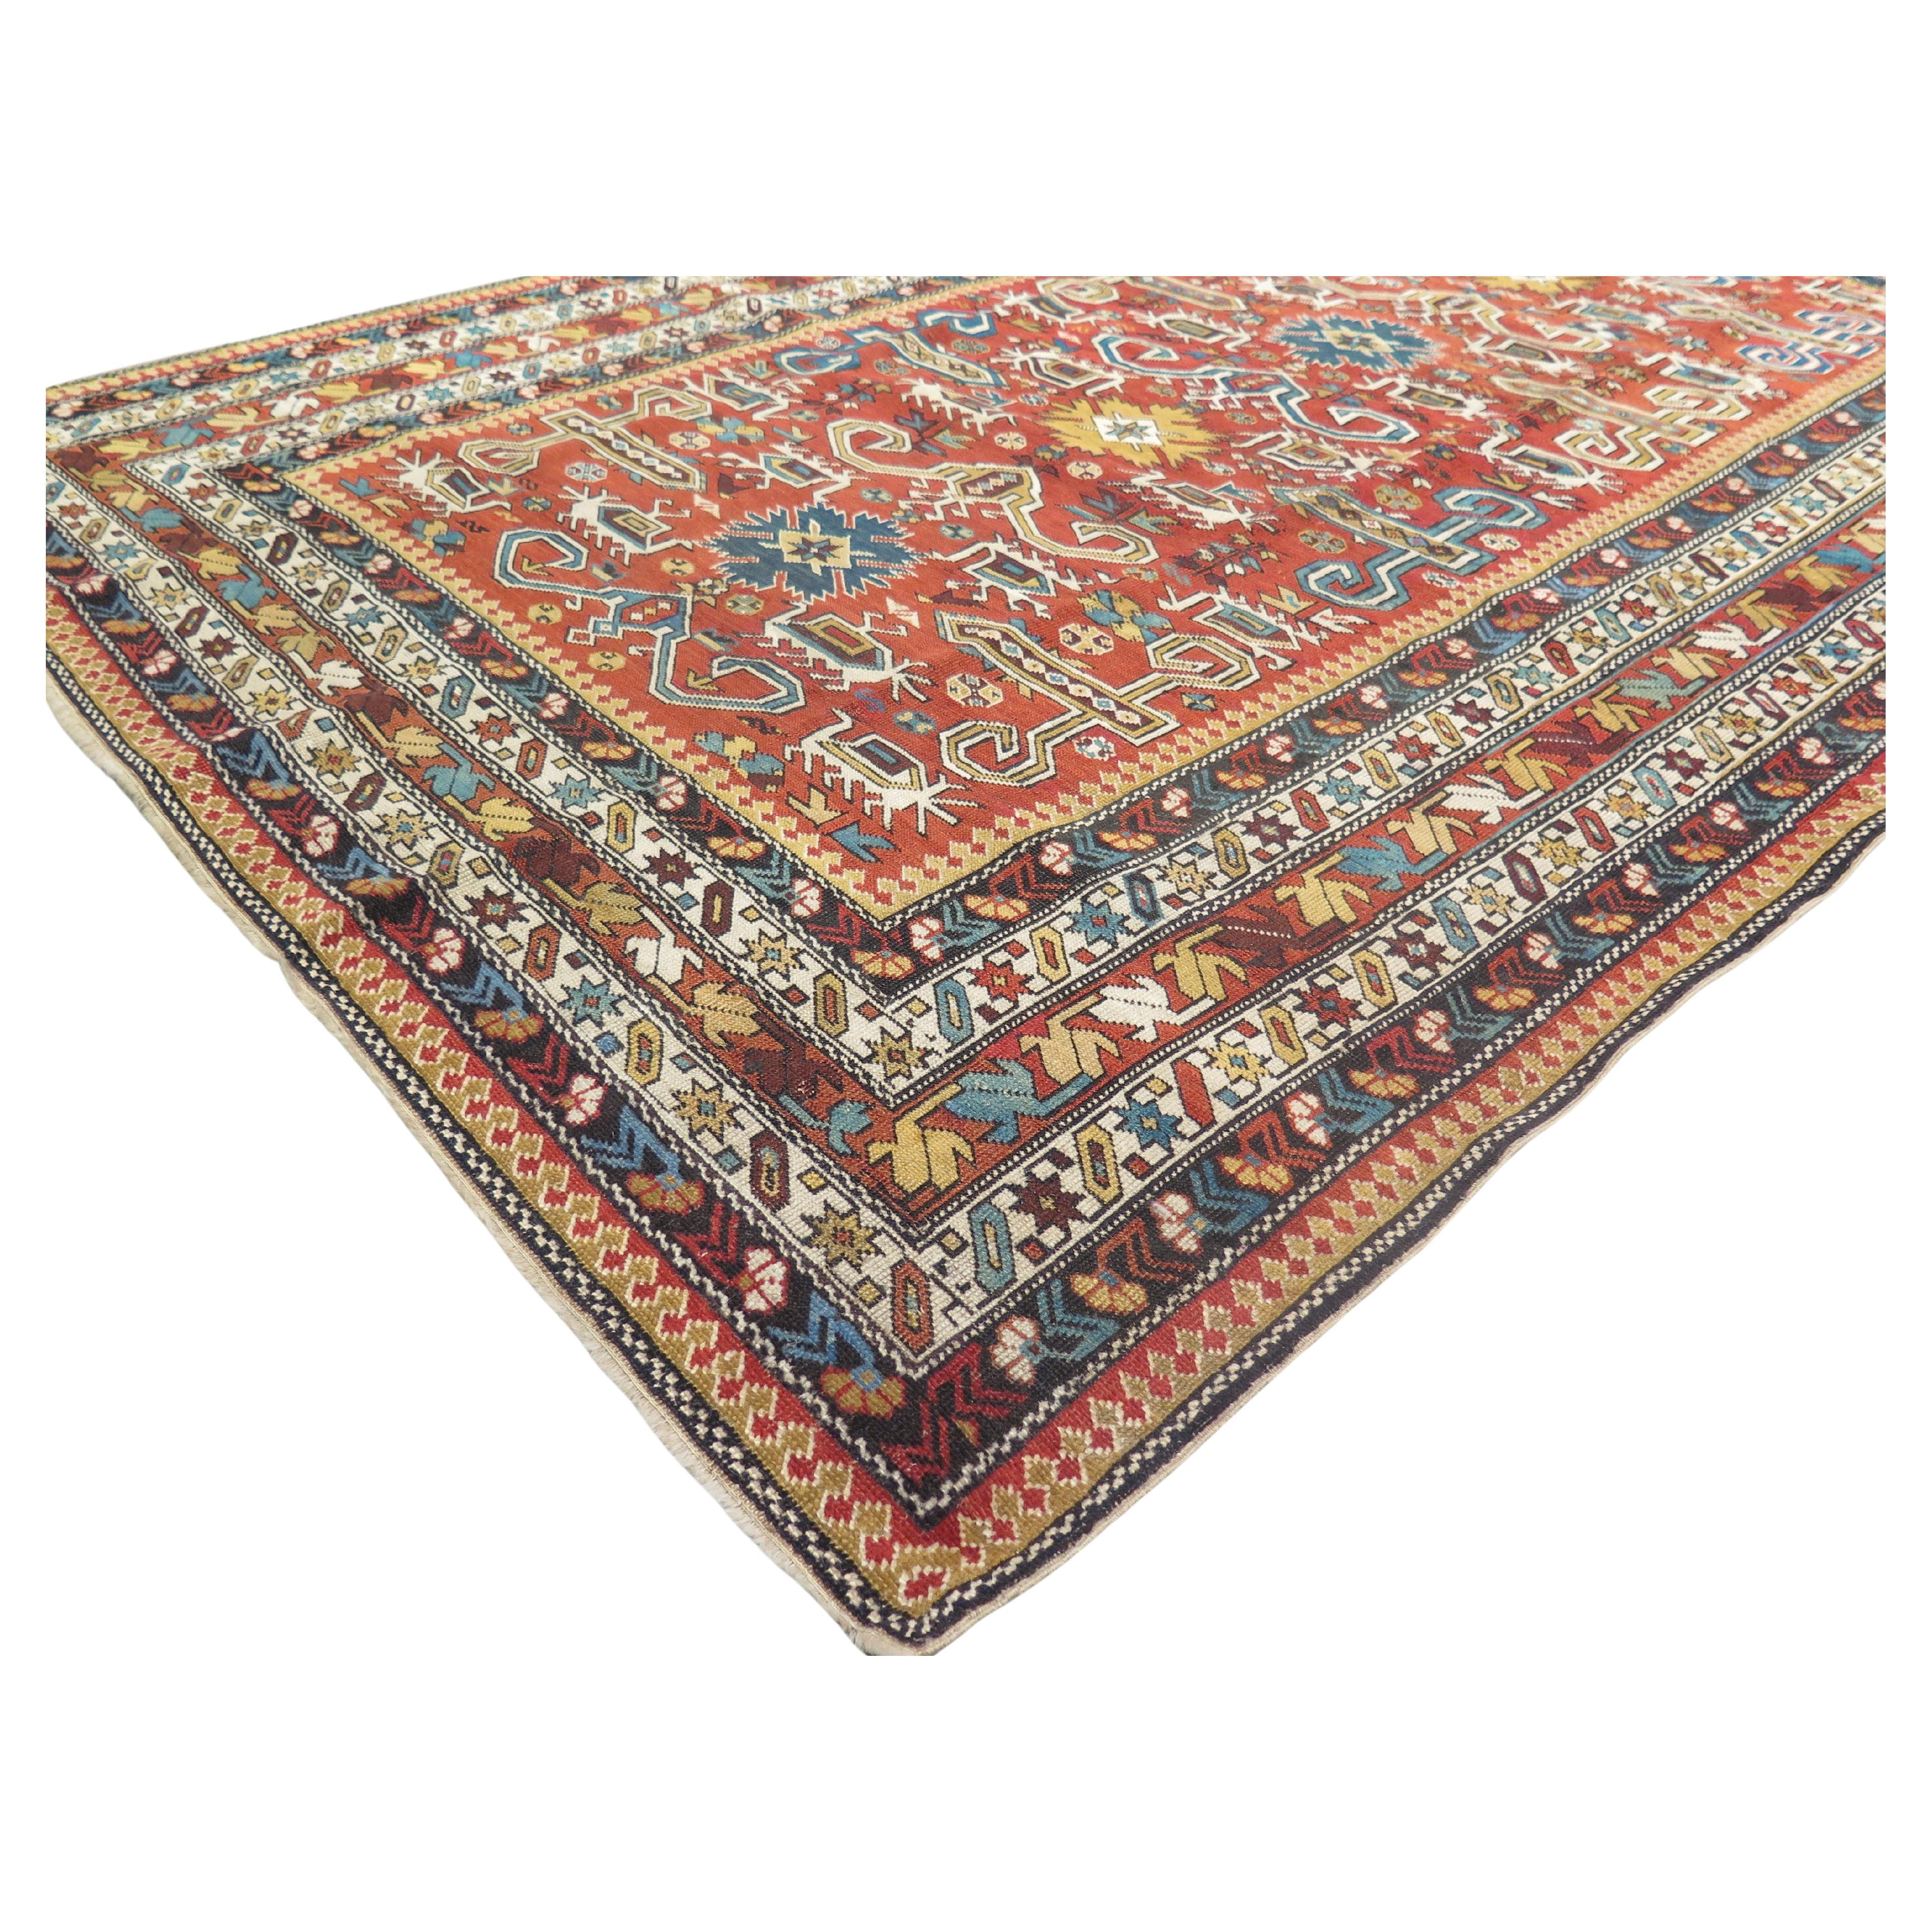 Exceptional Perpedil Rug, c. 1880 For Sale